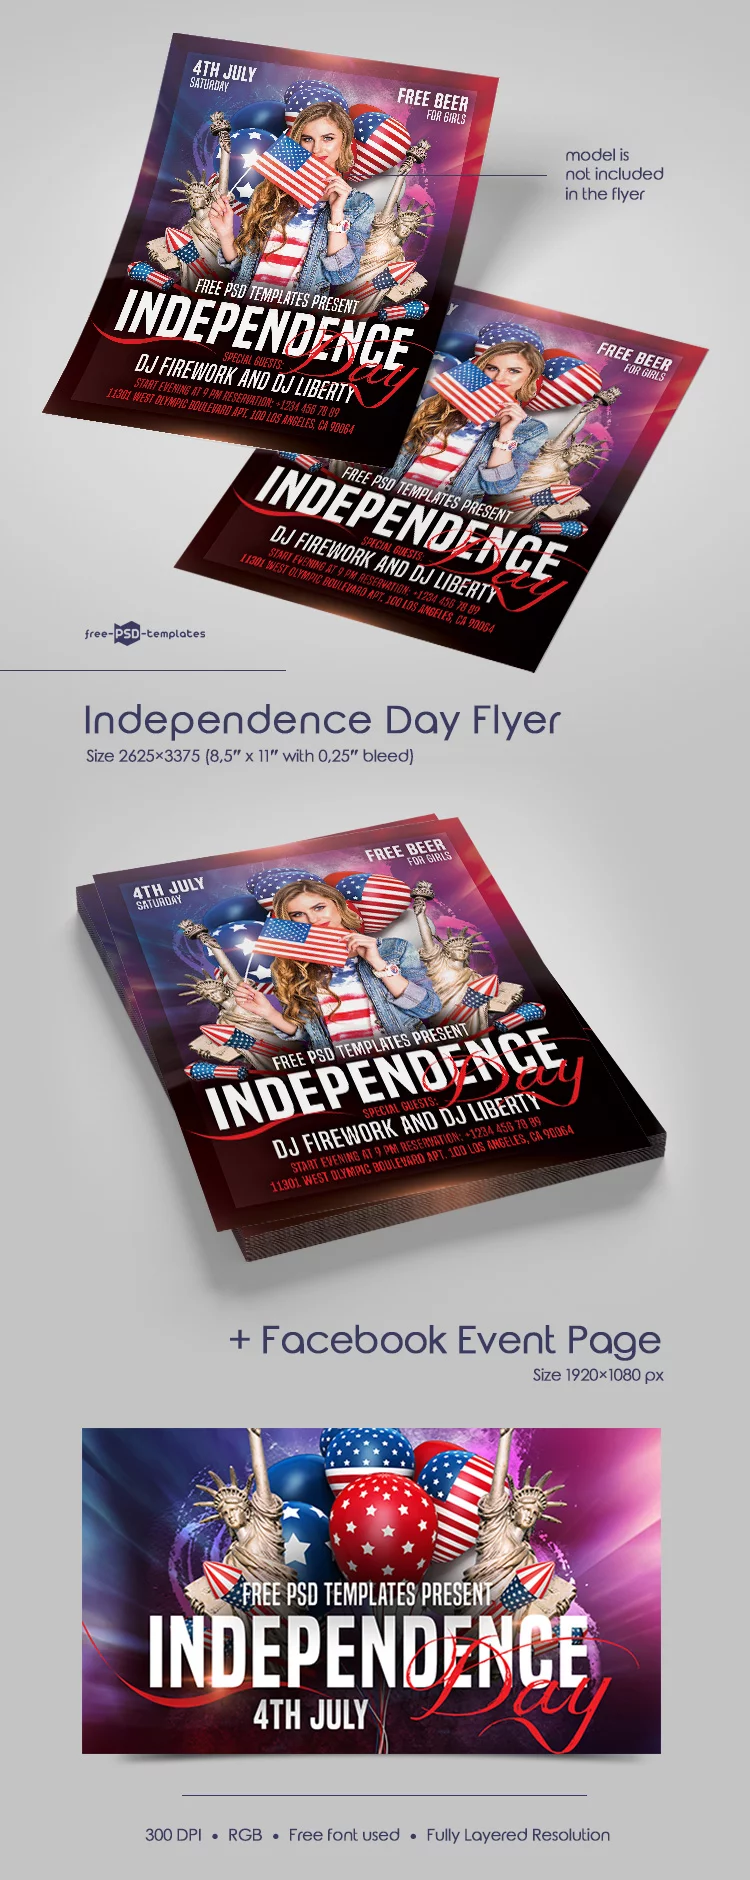 Free Independence Day Flyer in PSD